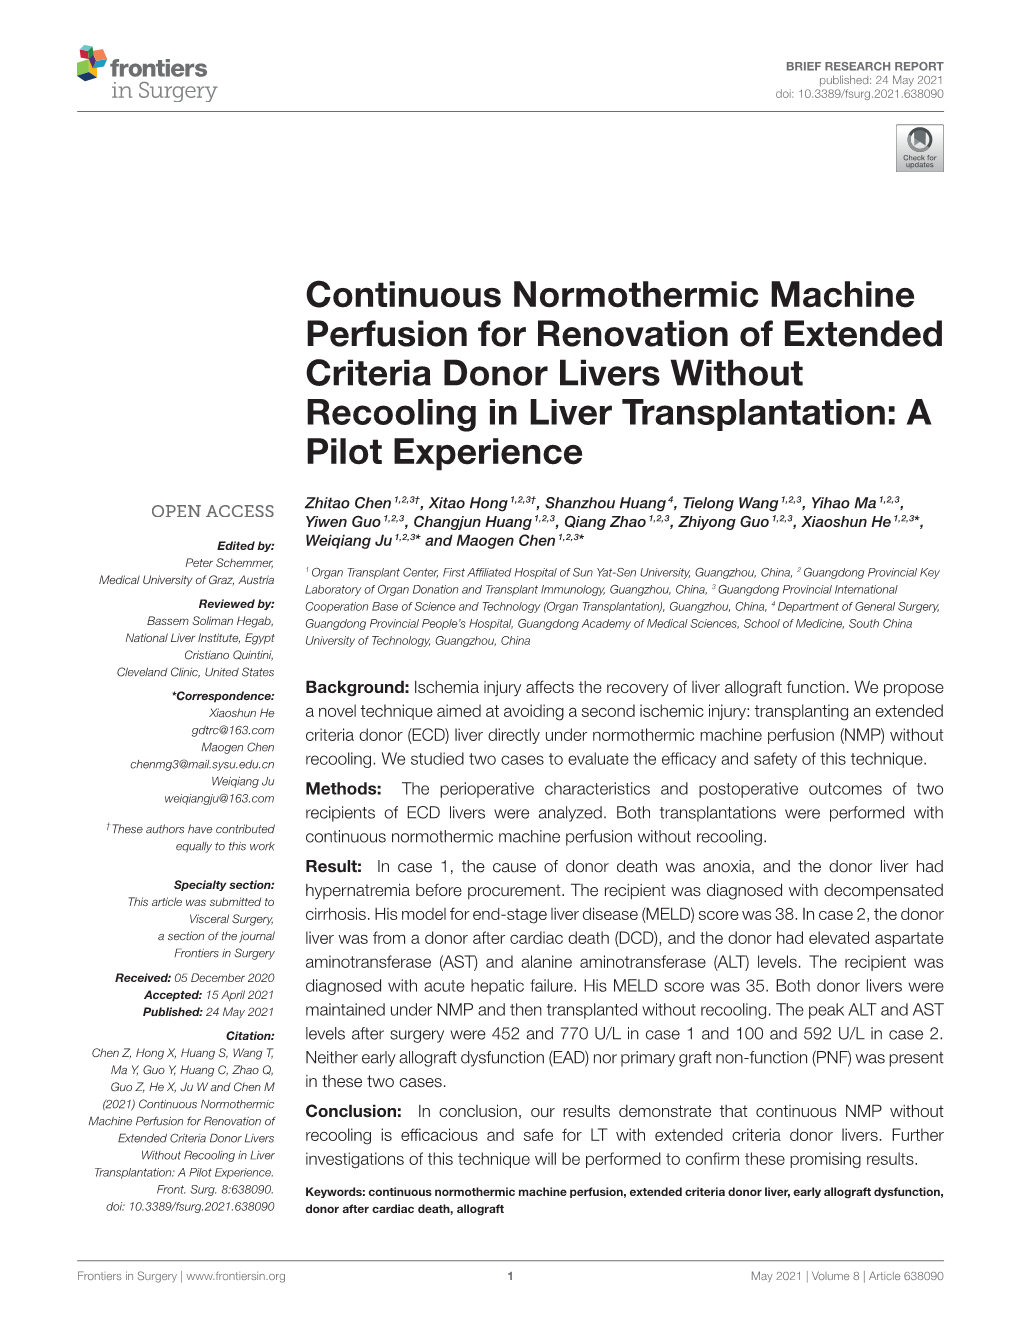 Continuous Normothermic Machine Perfusion for Renovation of Extended Criteria Donor Livers Without Recooling in Liver Transplantation: a Pilot Experience